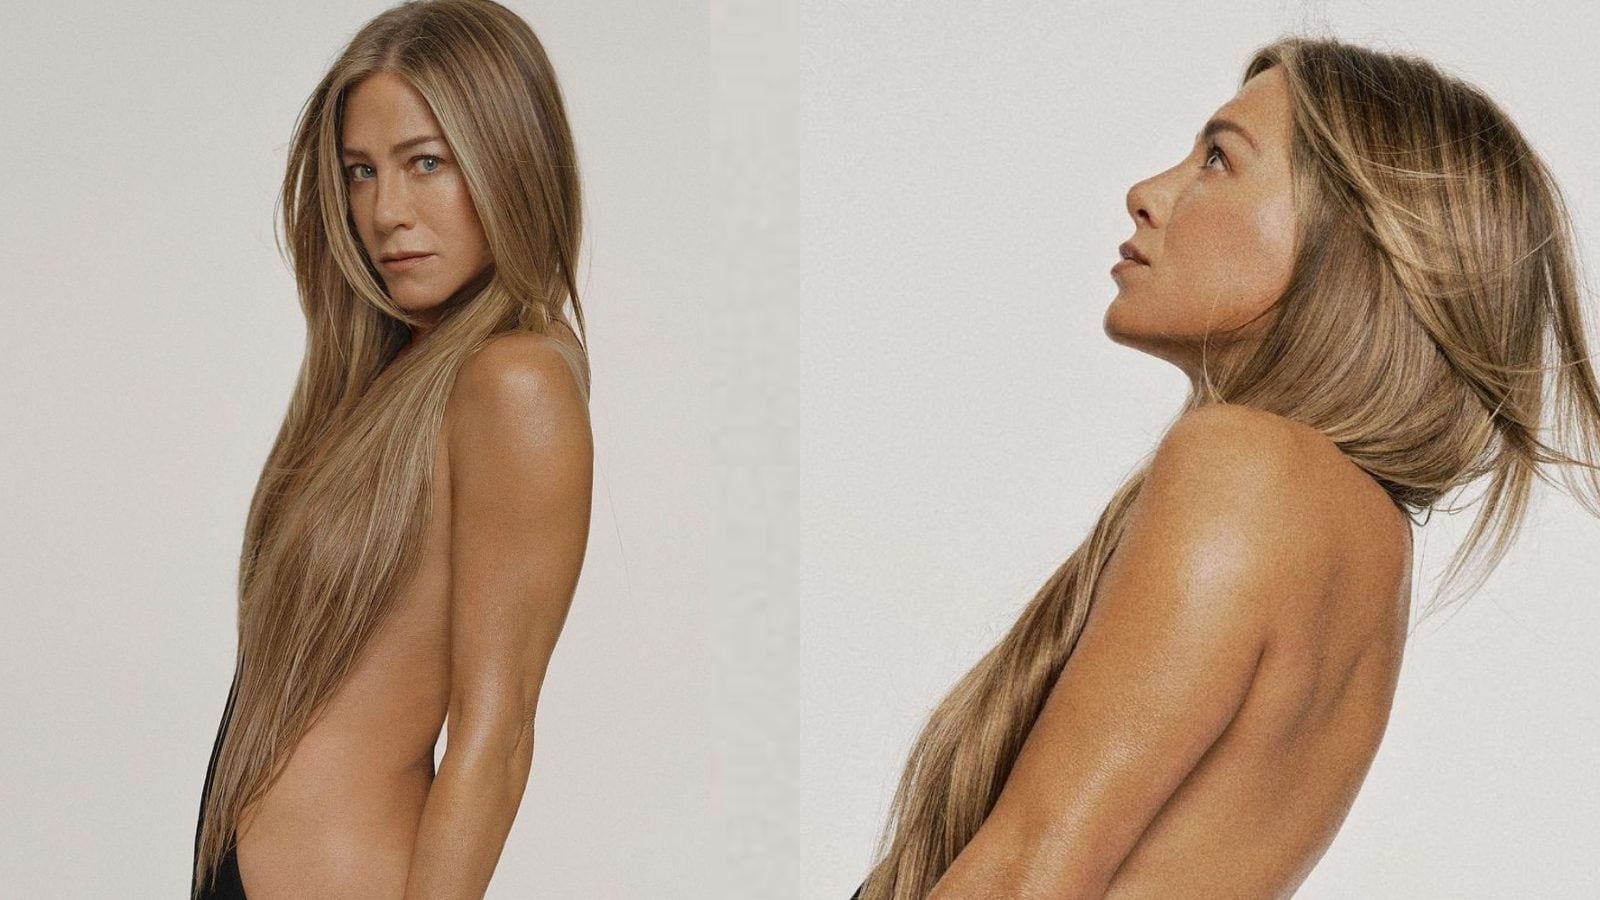 Jennifer Aniston Pregnant Gangbang - Jennifer Aniston Goes Almost Nude at 53 in Bold Photo Shoot; See 'Friends'  Actor's Sexy Pics - News18